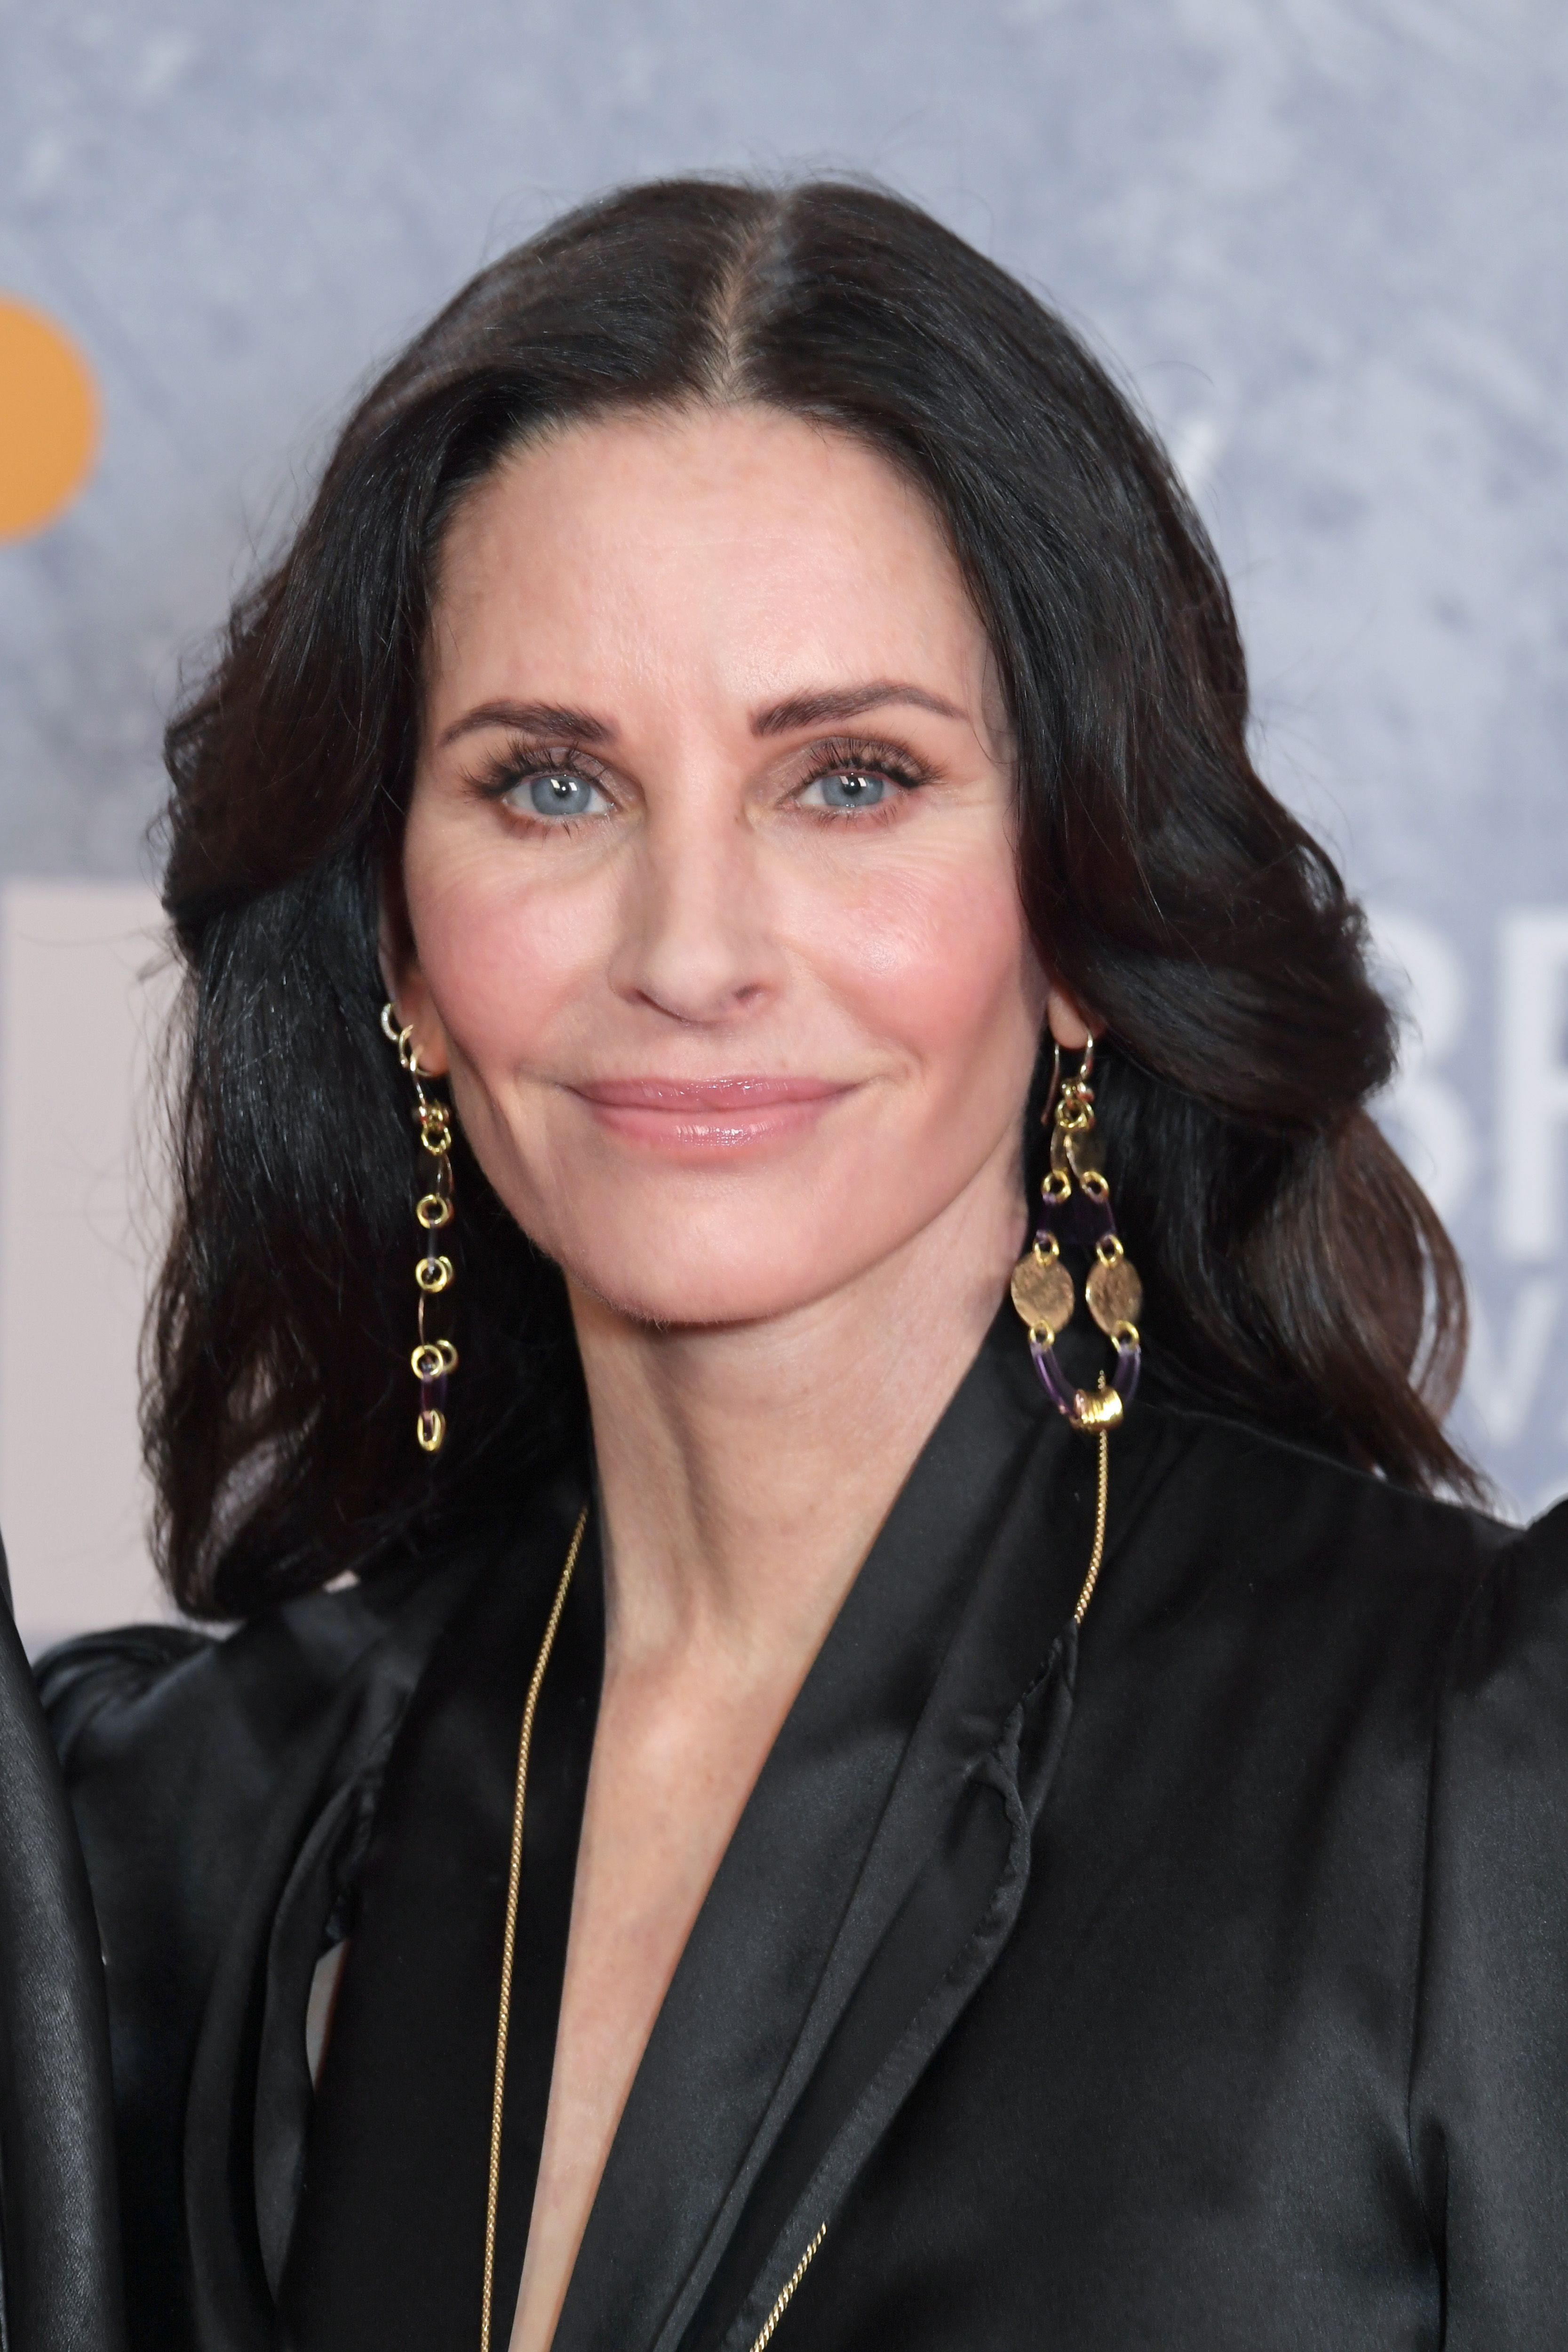 Courteney Cox during The BRIT Awards 2022 at The O2 Arena on February 8, 2022, in London, England. | Source: Getty Images